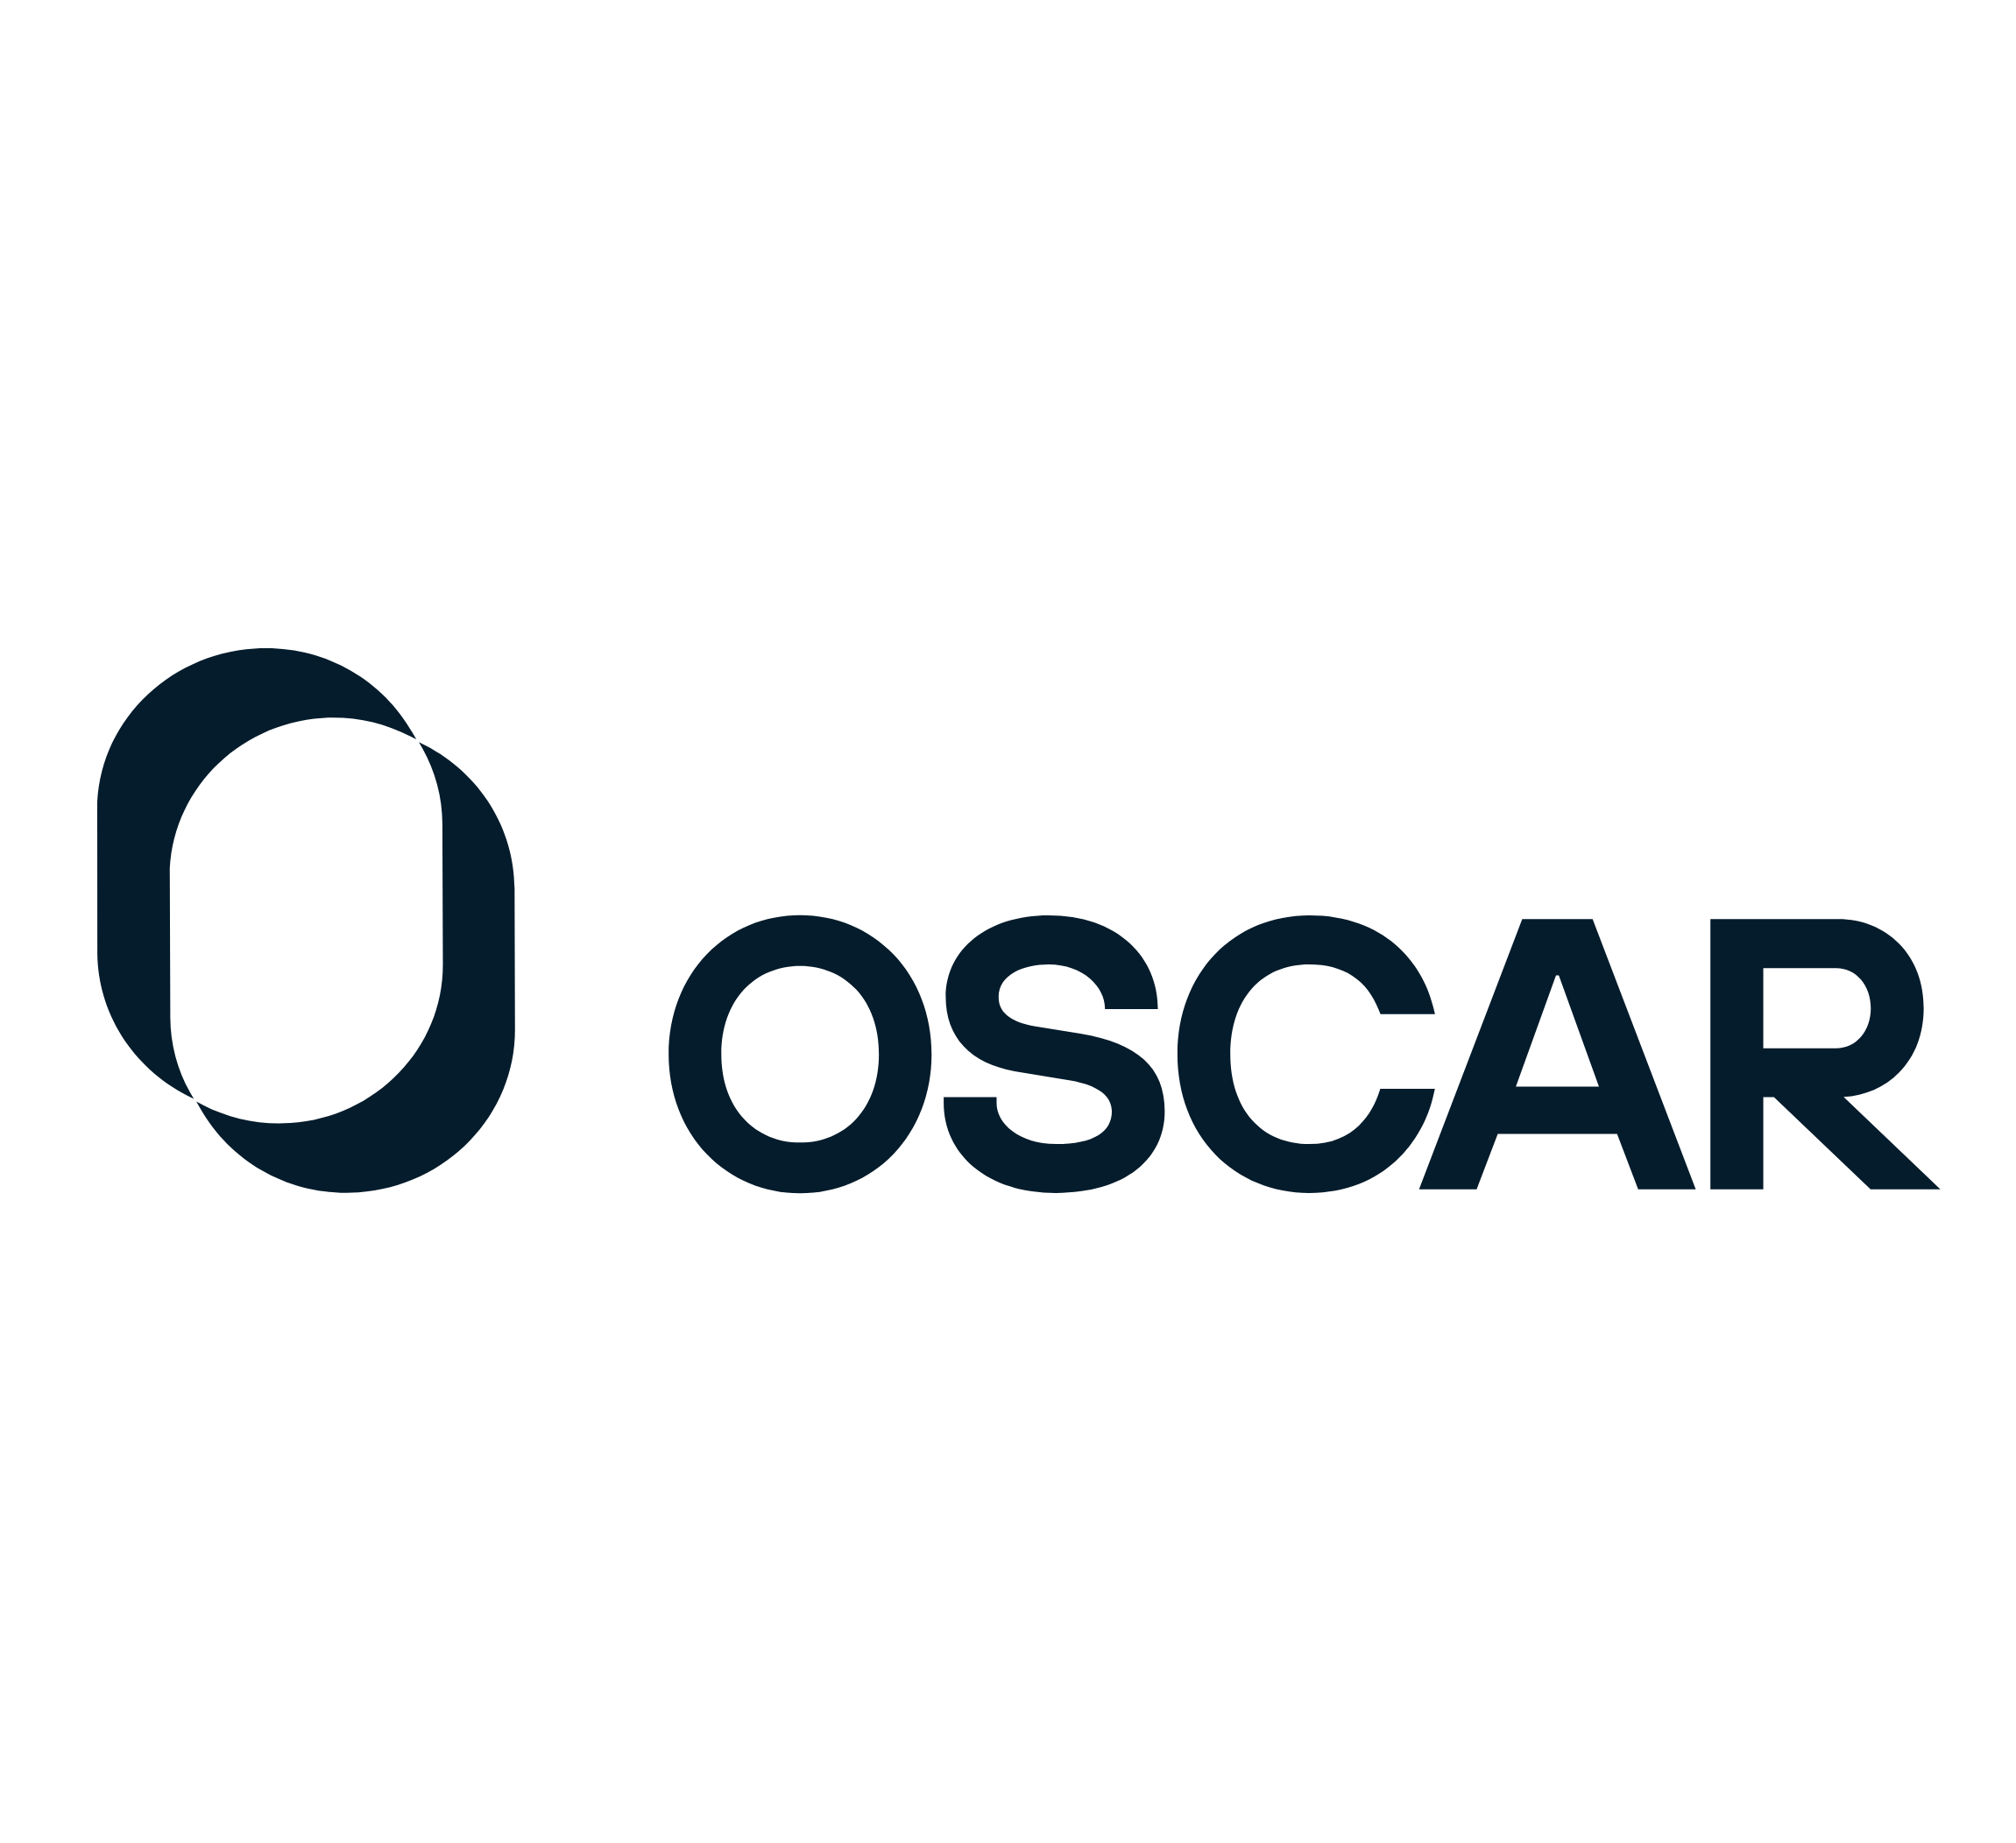 Oscar Changing Perspectives